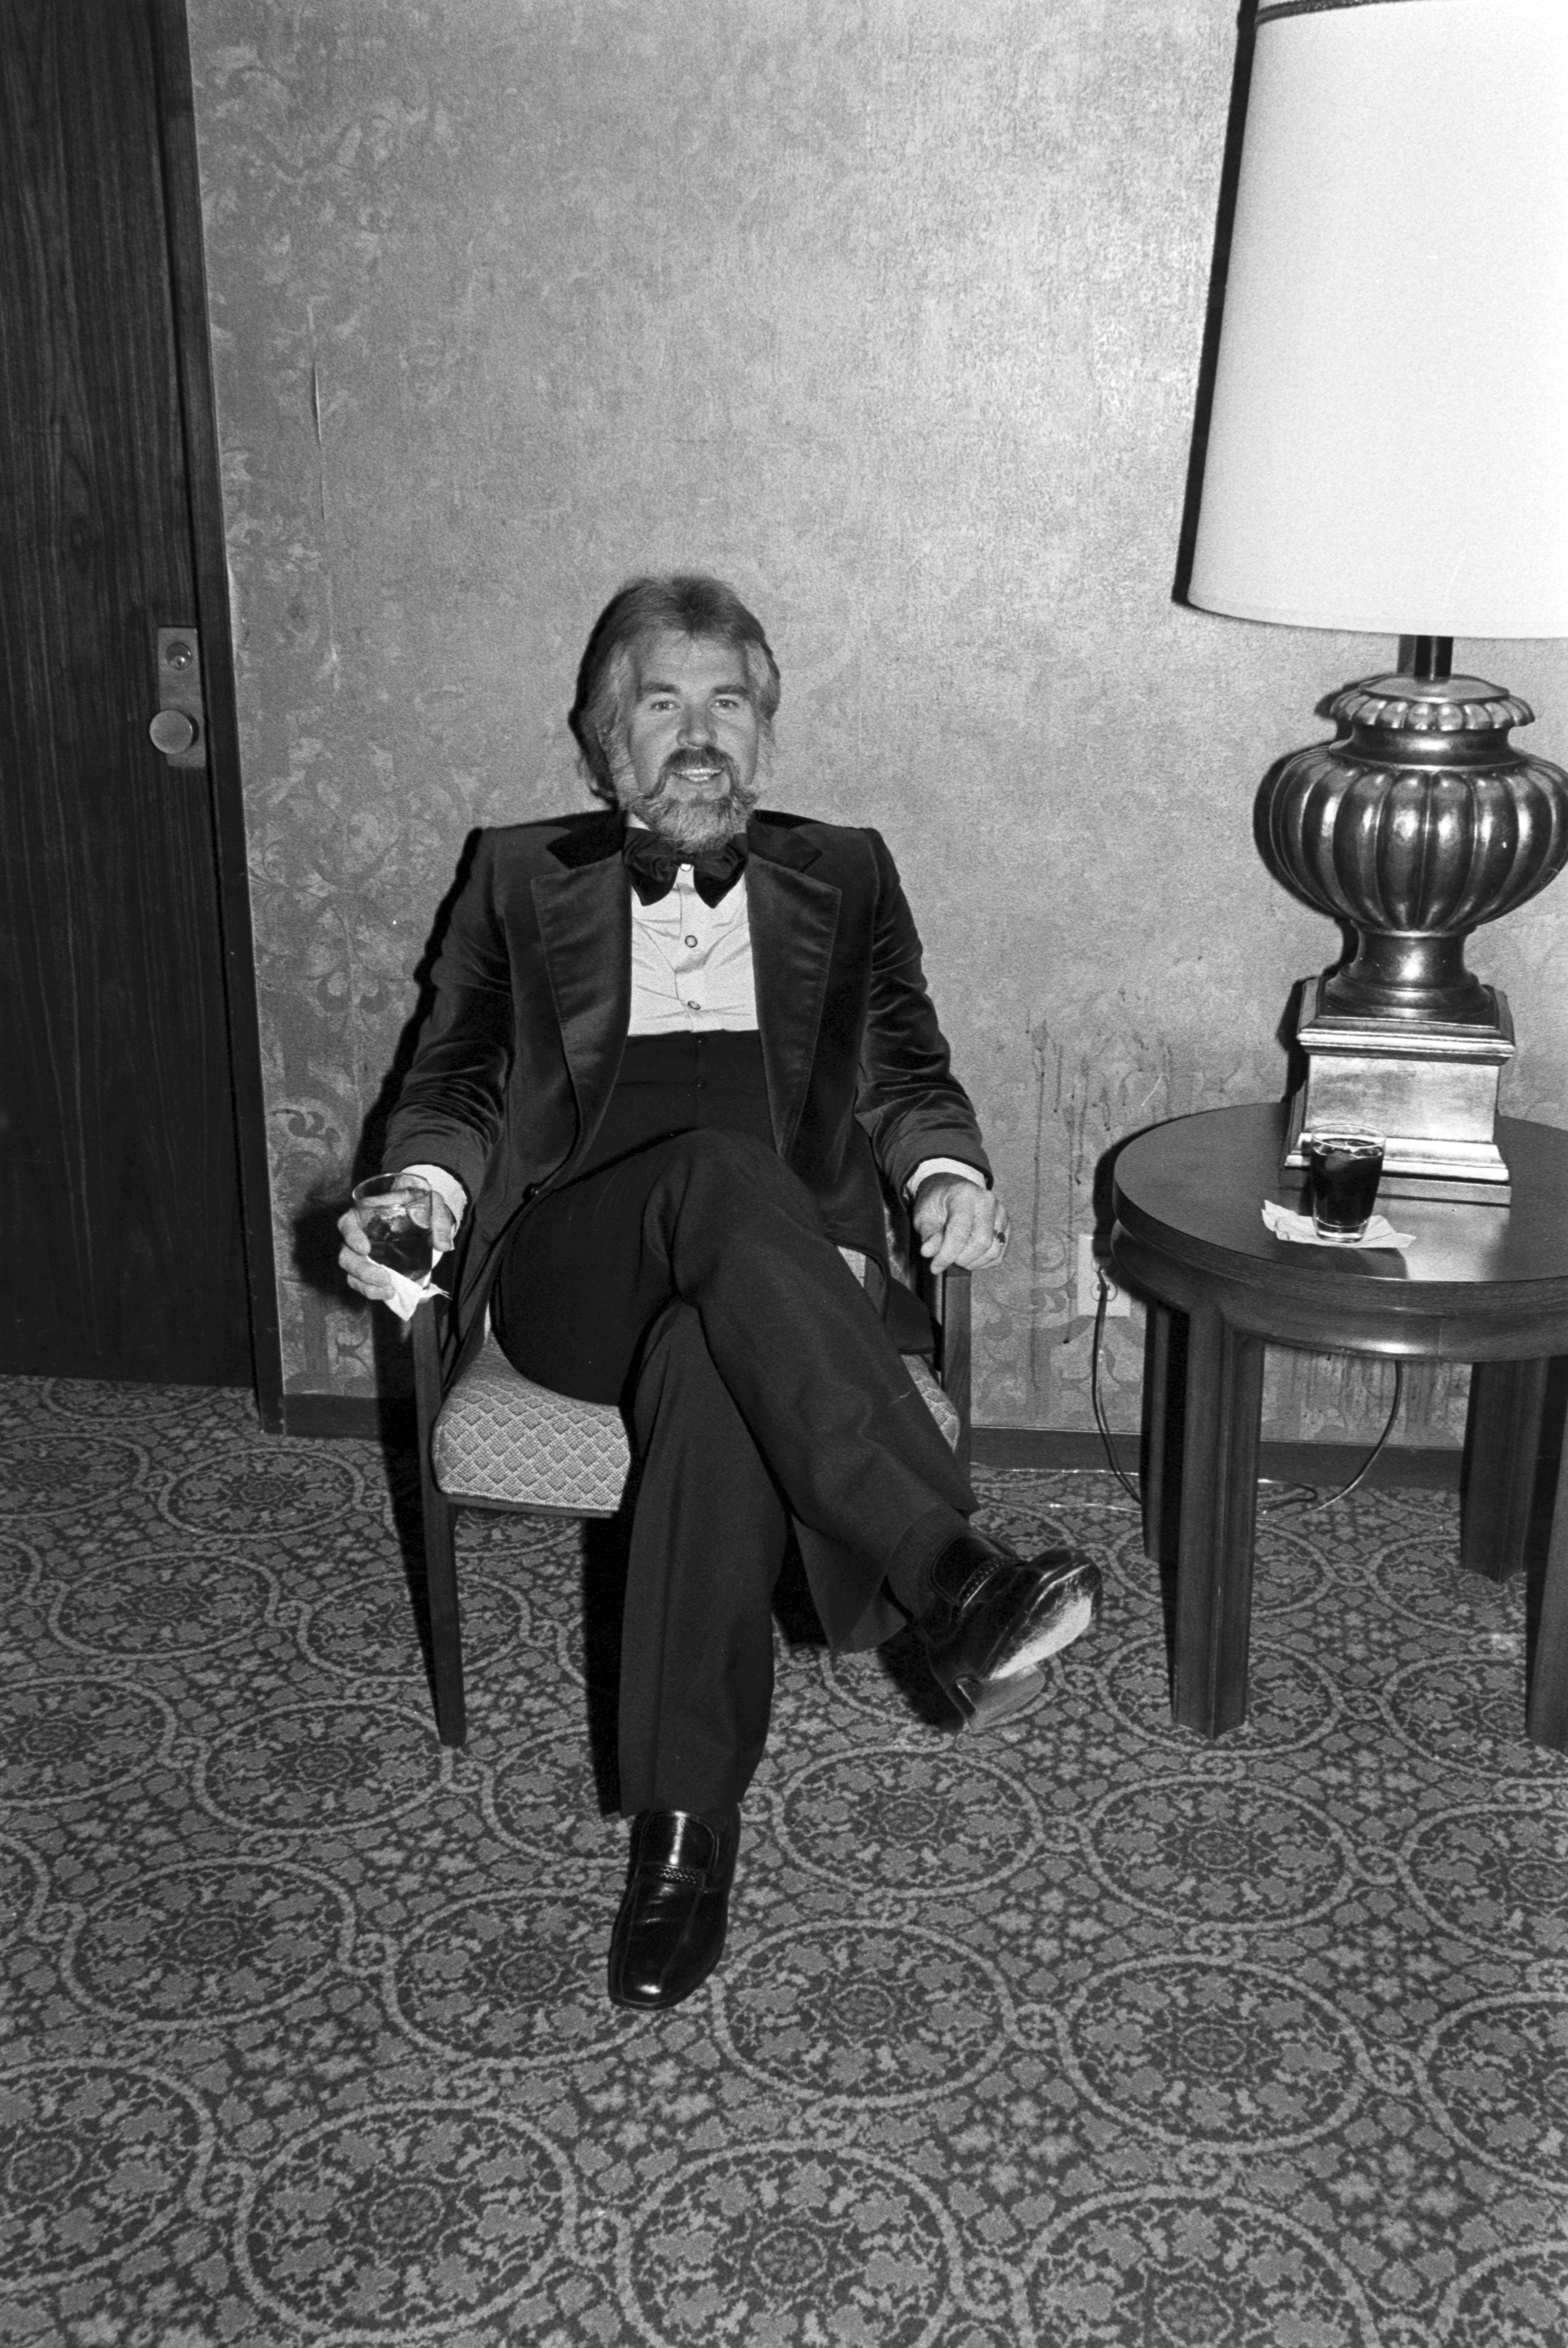 The late singer at an event, presented by American Friends of the Hebrew University, in Los Angeles, California, on November 14, 1978 | Source: Getty Images